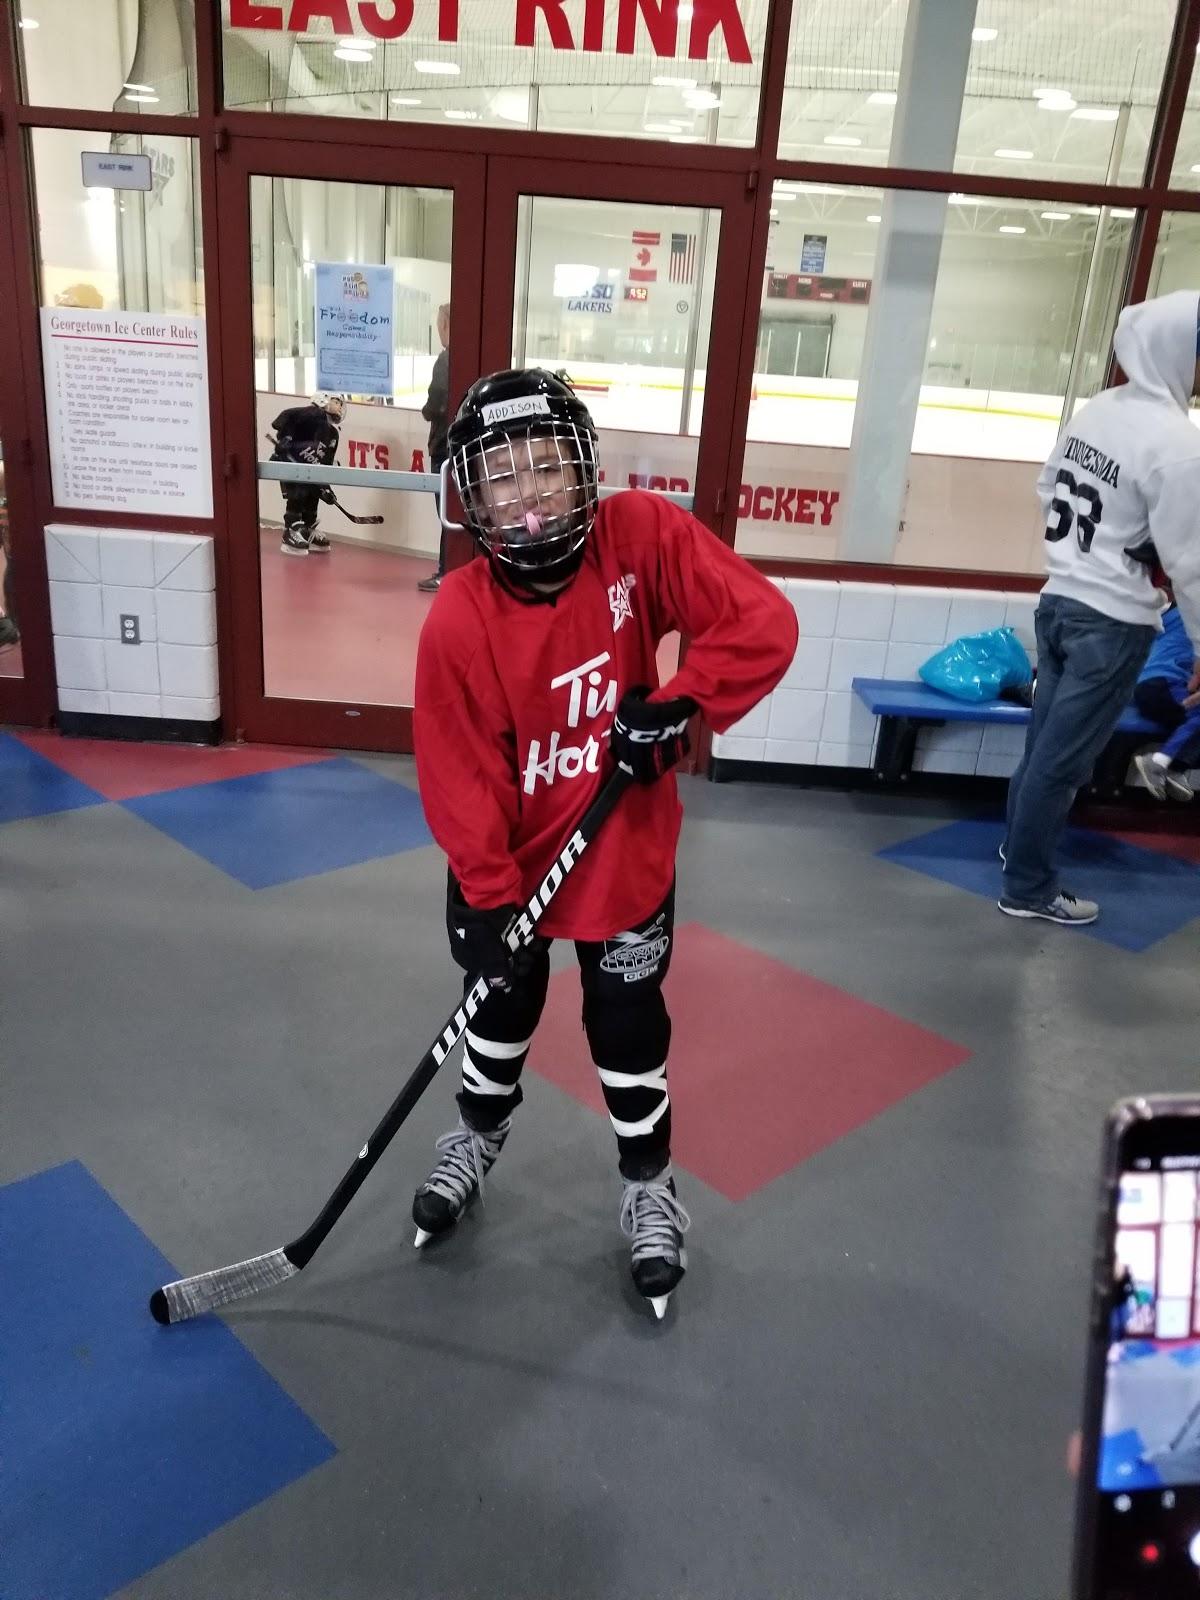 Roller Hockey at Griff's Georgetown – Griff's Georgetown